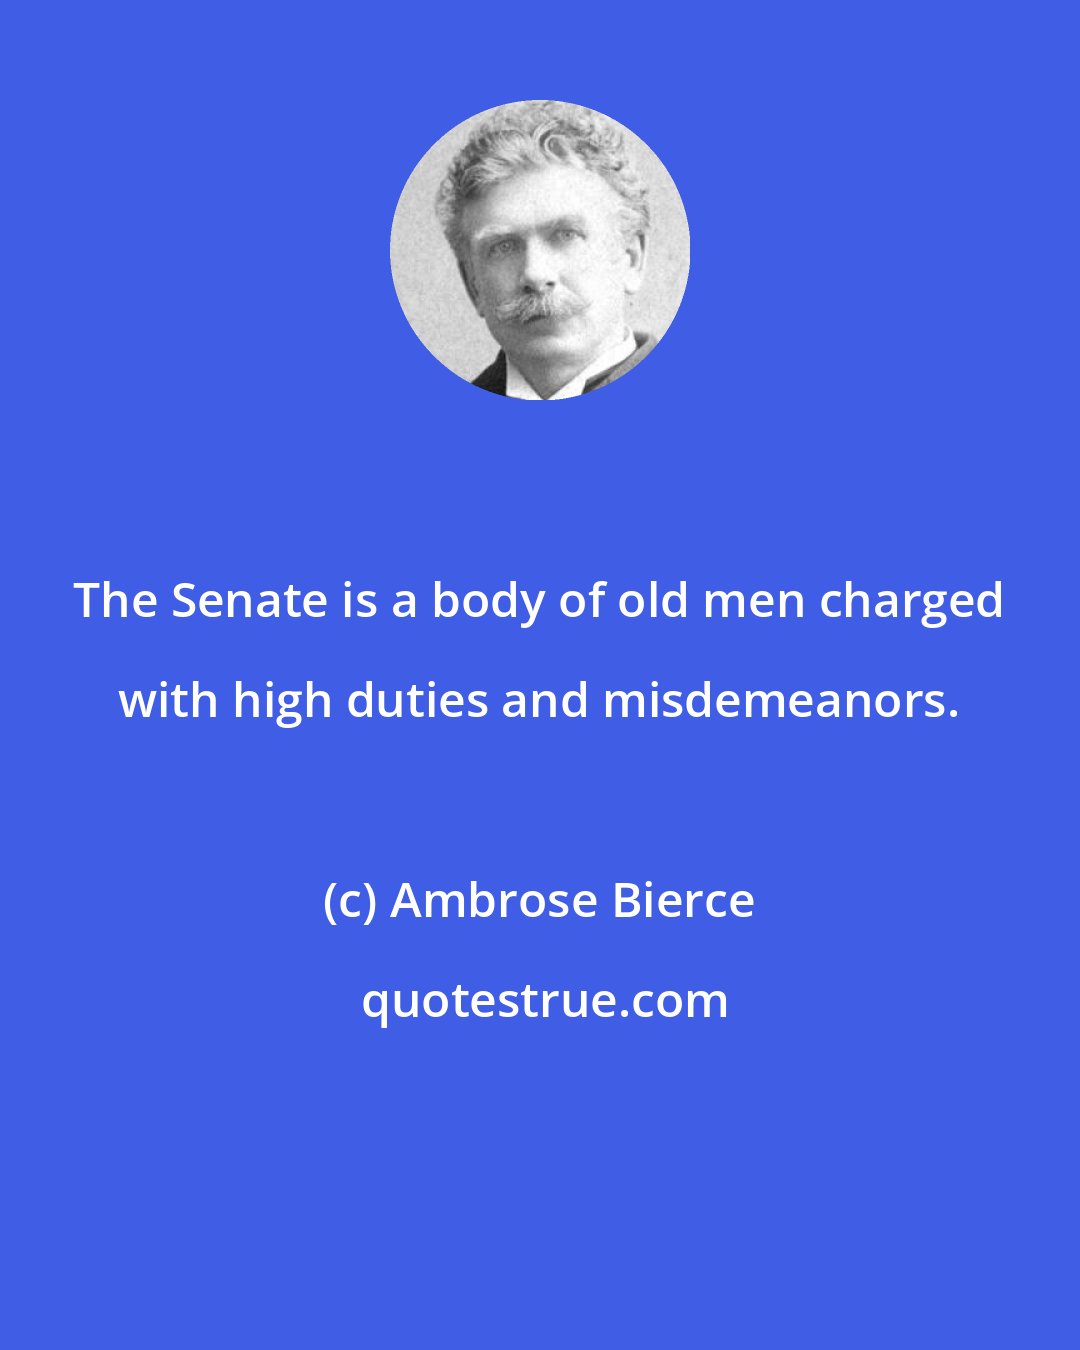 Ambrose Bierce: The Senate is a body of old men charged with high duties and misdemeanors.